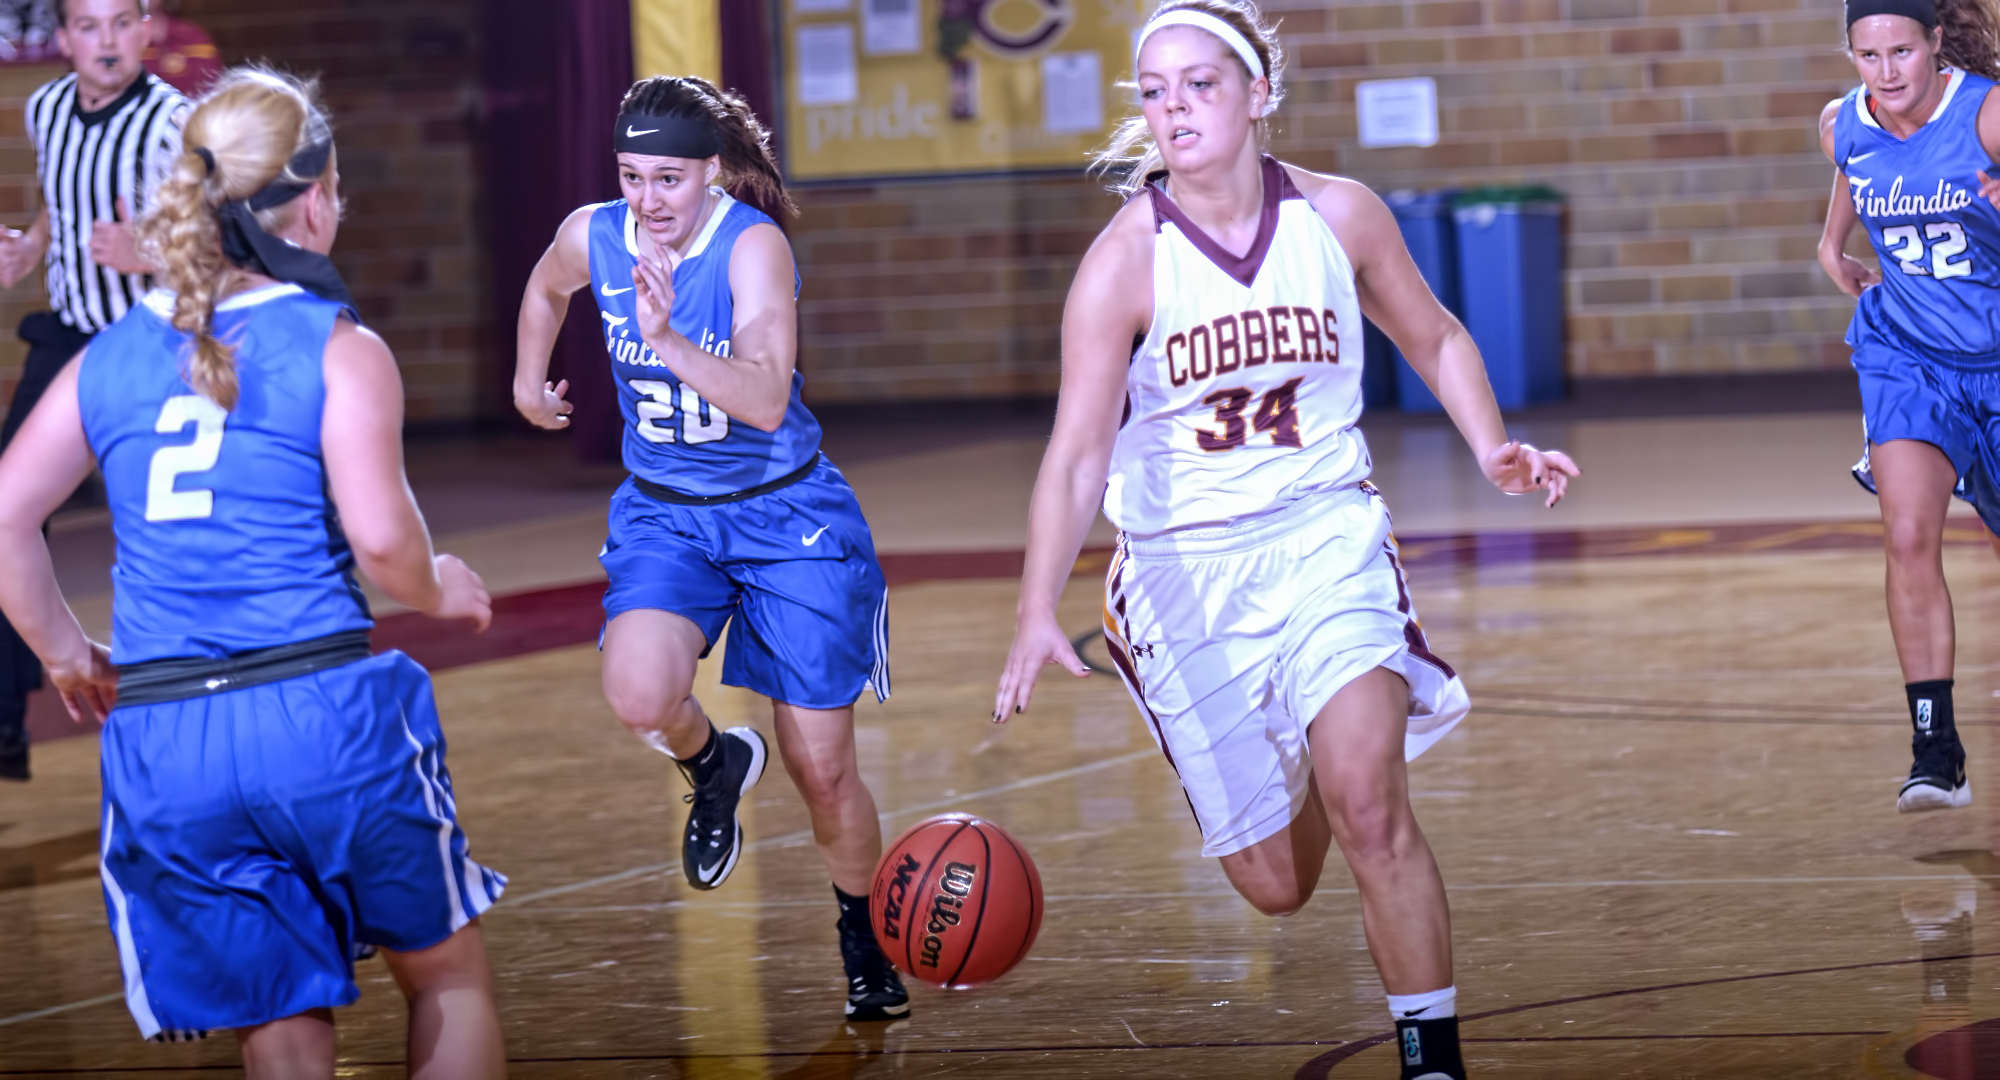 Junior Grace Wolhowe brings the ball up the court during the Cobbers' 95-52 win over Finlandia. Wolhowe finished with 13 points.